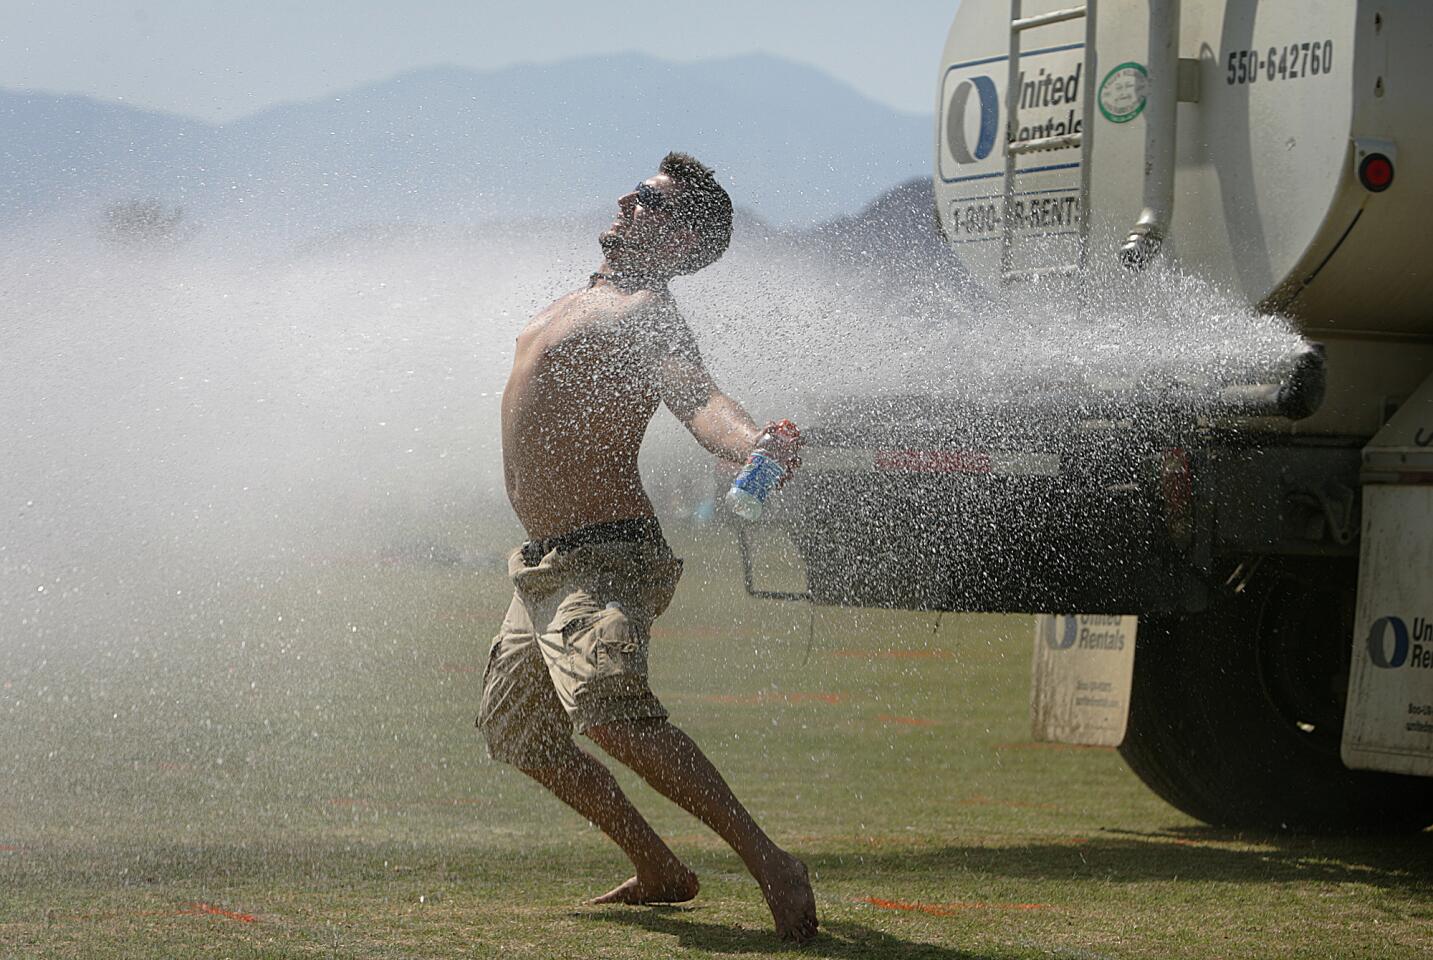 Tony Lynch, 24, of Albany, New York cools off behind a water truck after setting up his campsite, Thursday April 26, 2007.